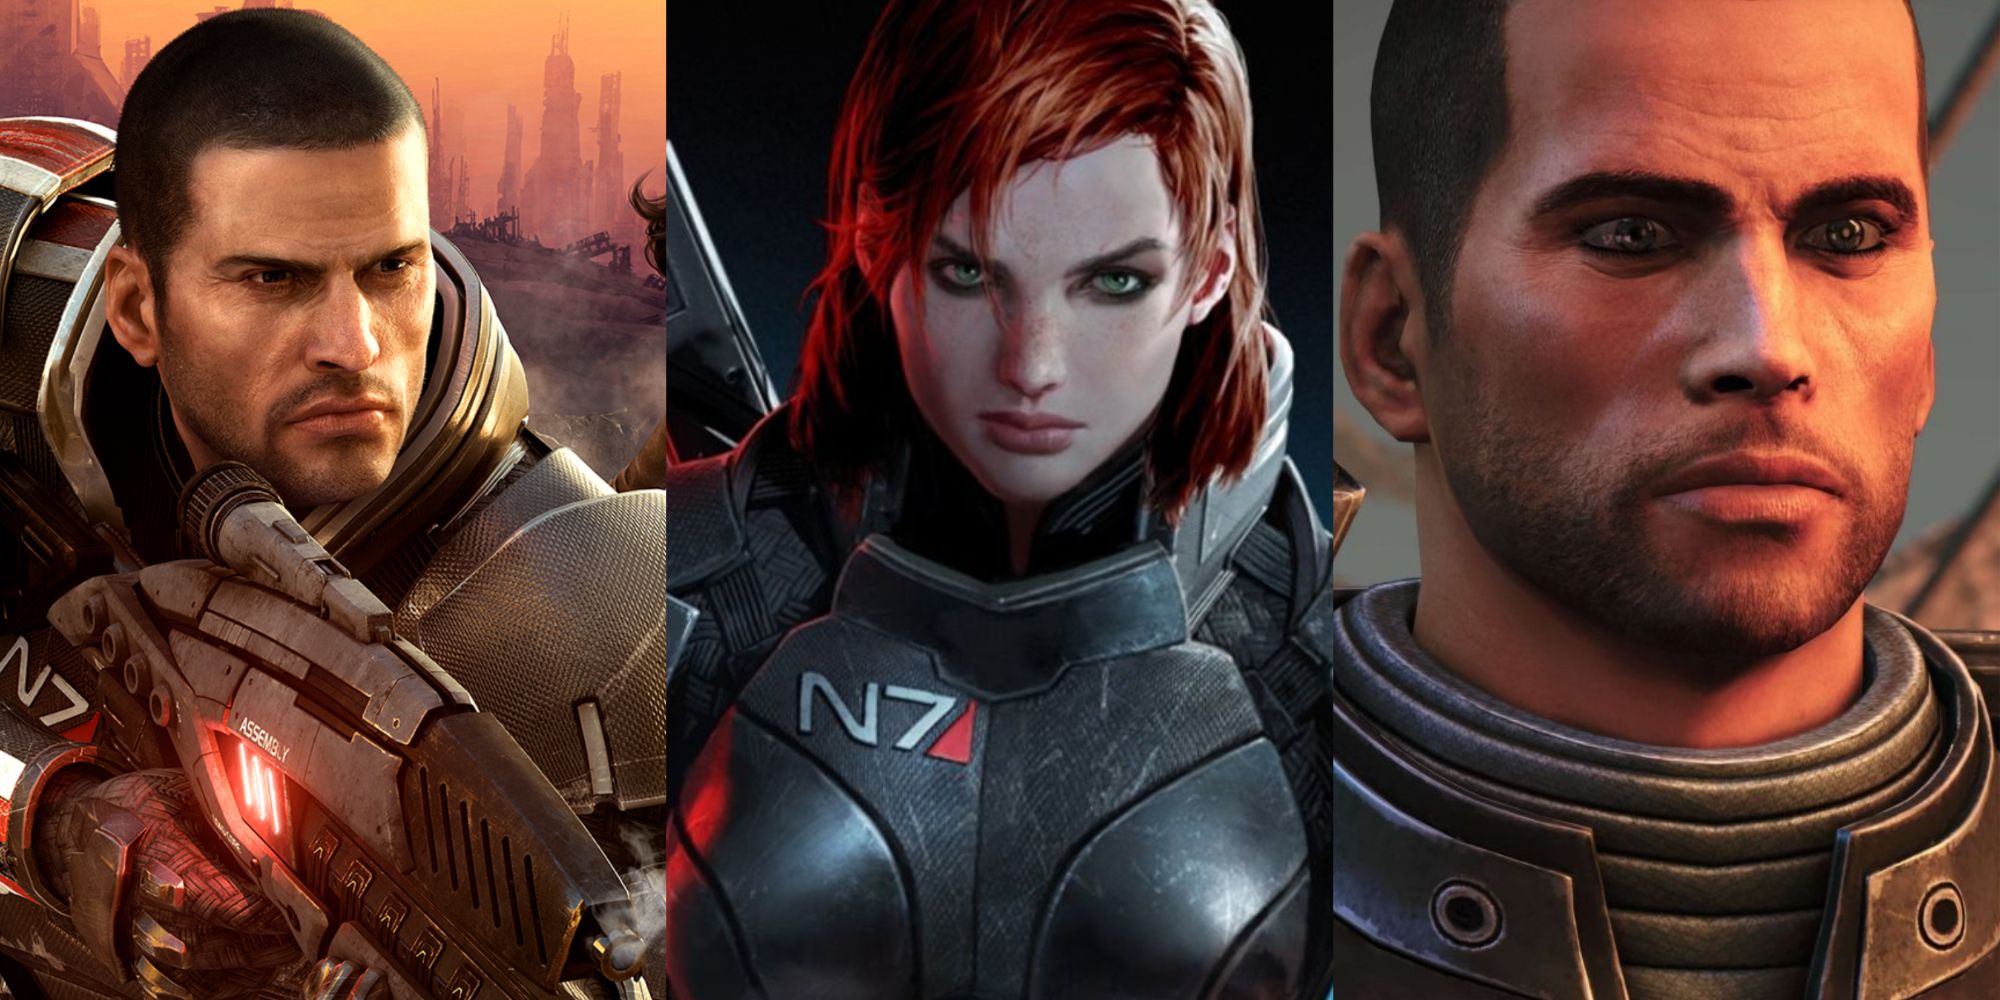 Split image screenshots showing the male and female versions of Commander Shepard.